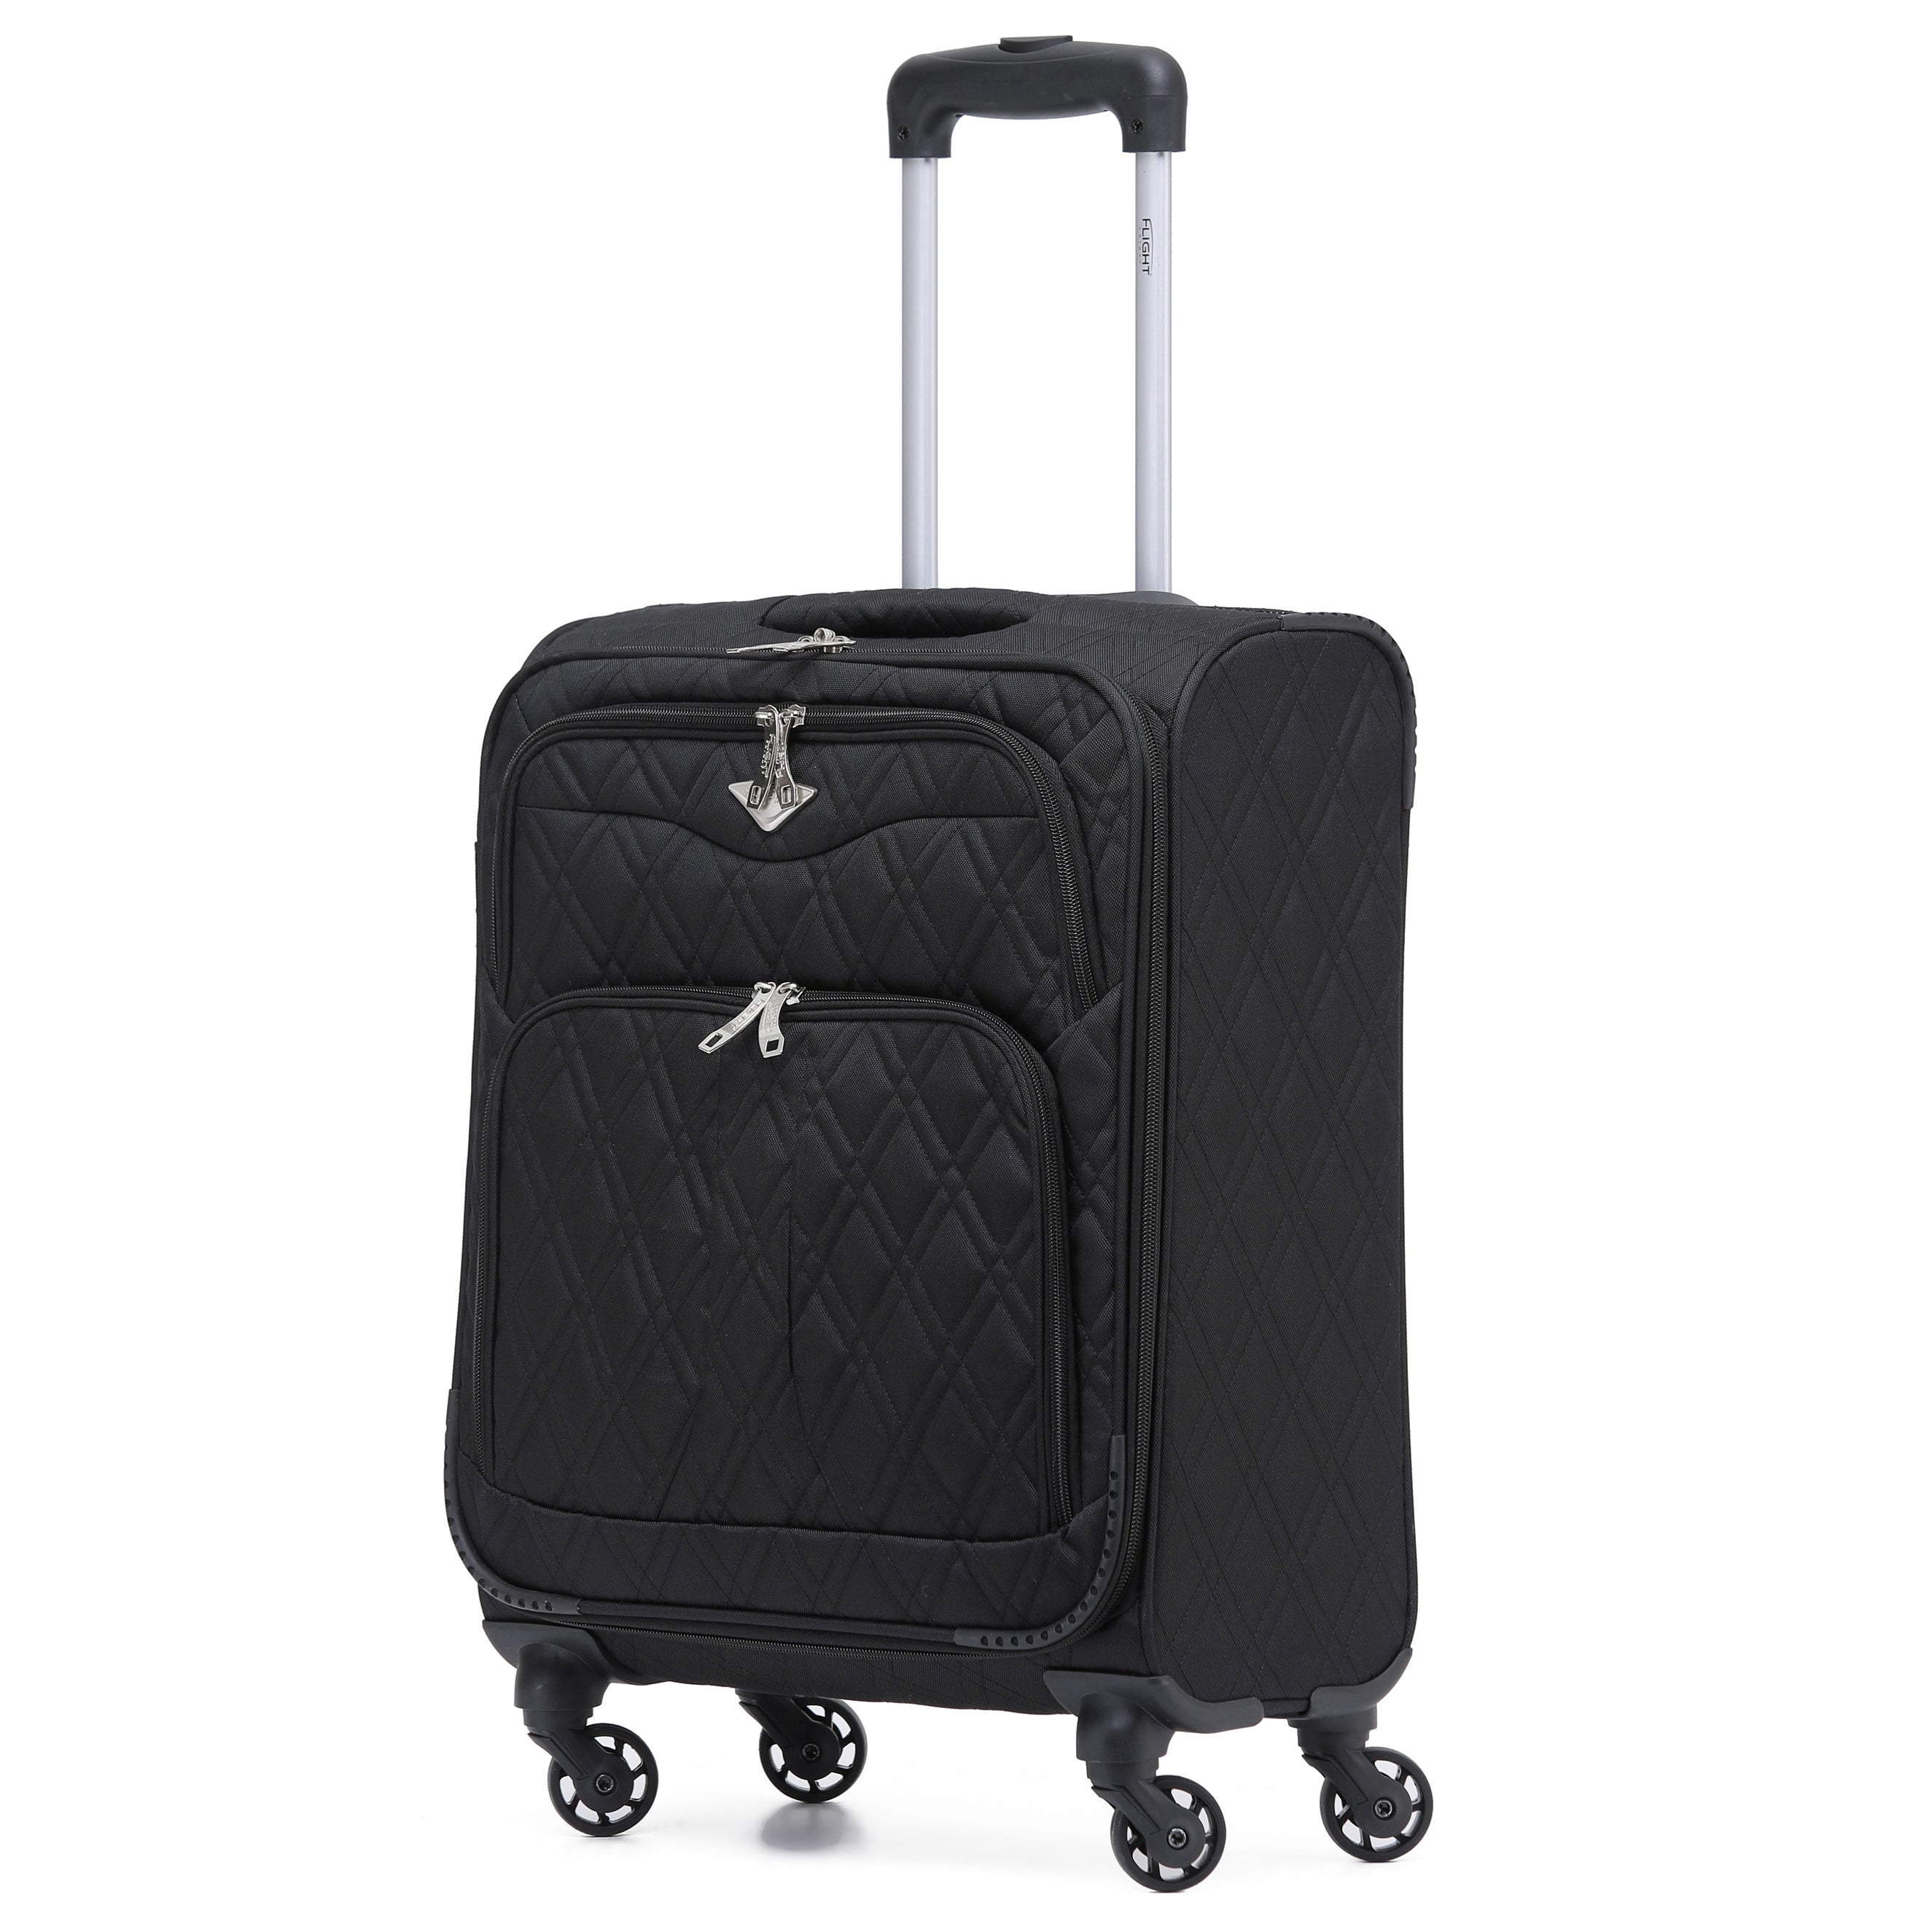 55x40x20cm 4 Wheel 800D Soft Case Suitcase Cabin Carry On Hand Luggage Ryanir Maximium Priority Carry On Approved